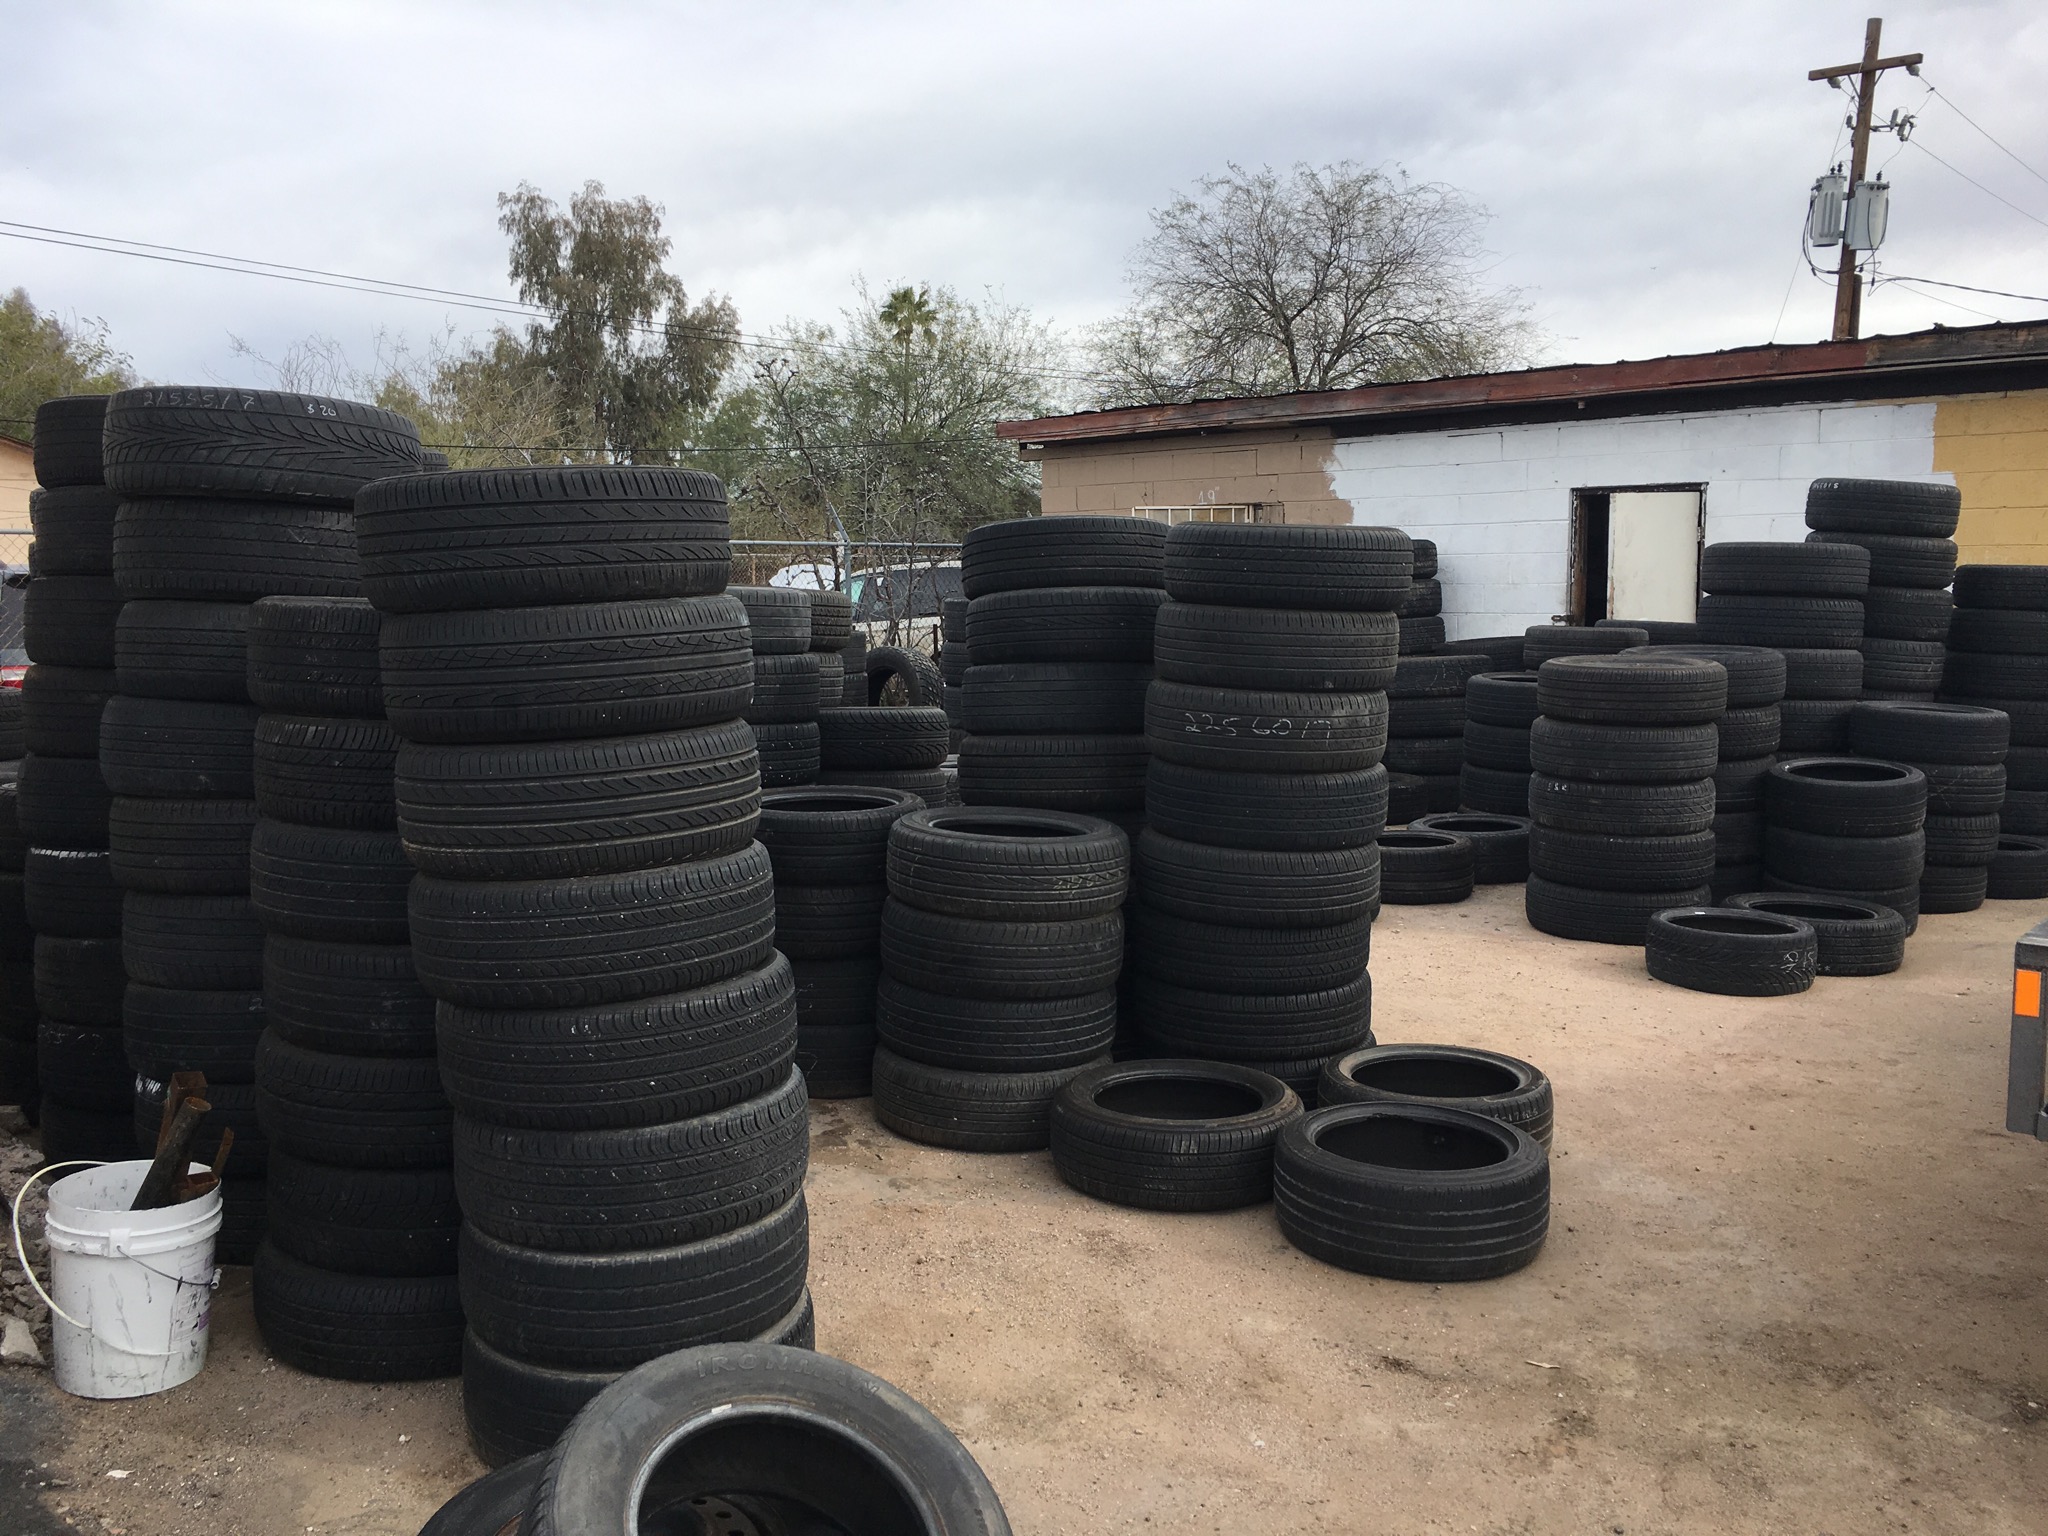 Chandler Auto Center Tires in Lot